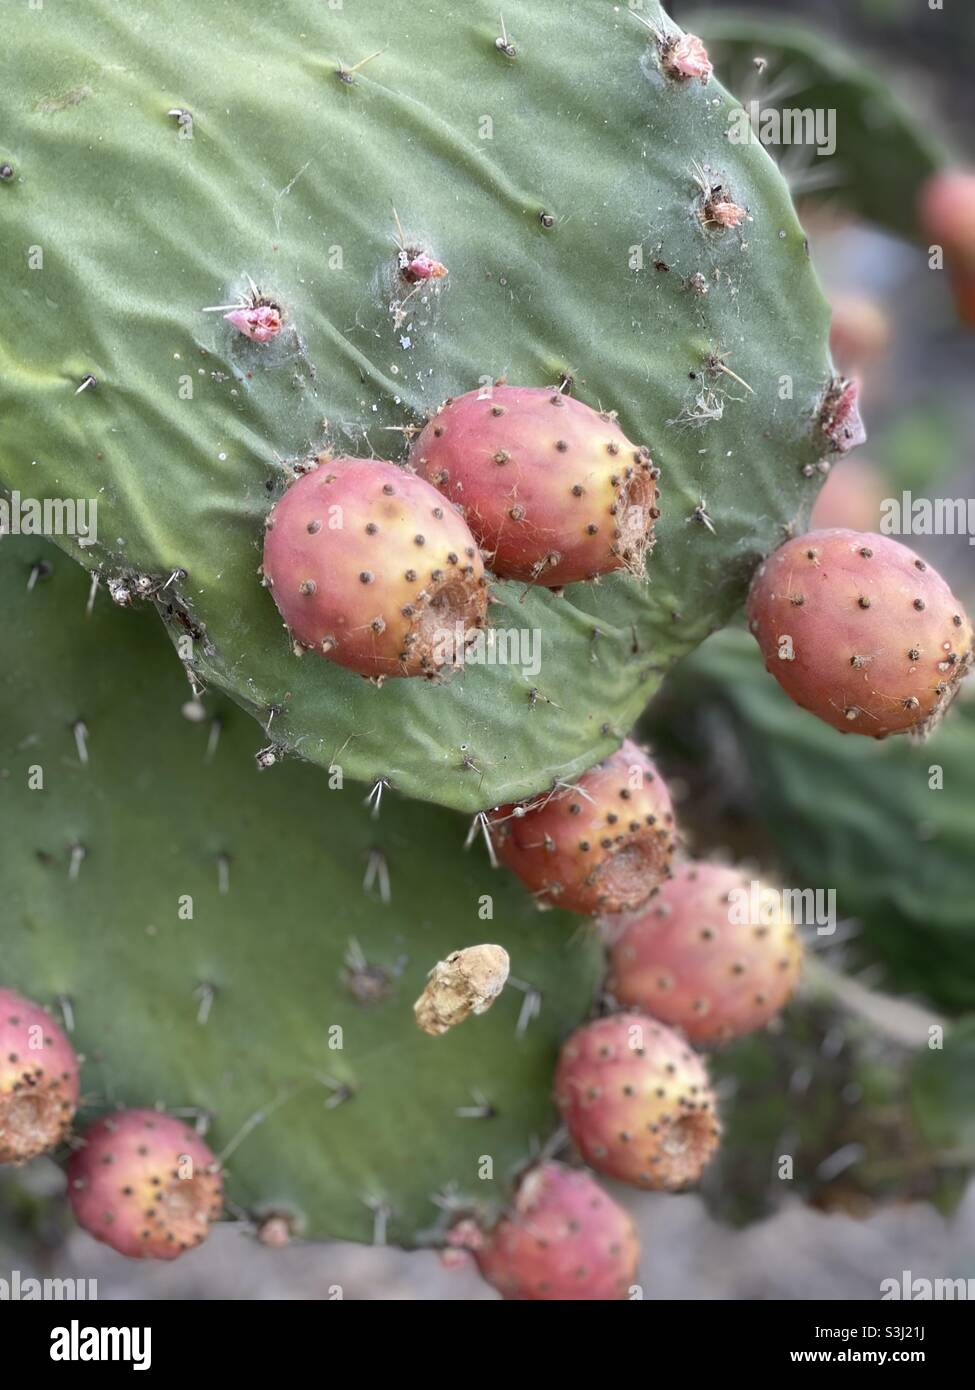 Many prickly pears at the end of summer Stock Photo